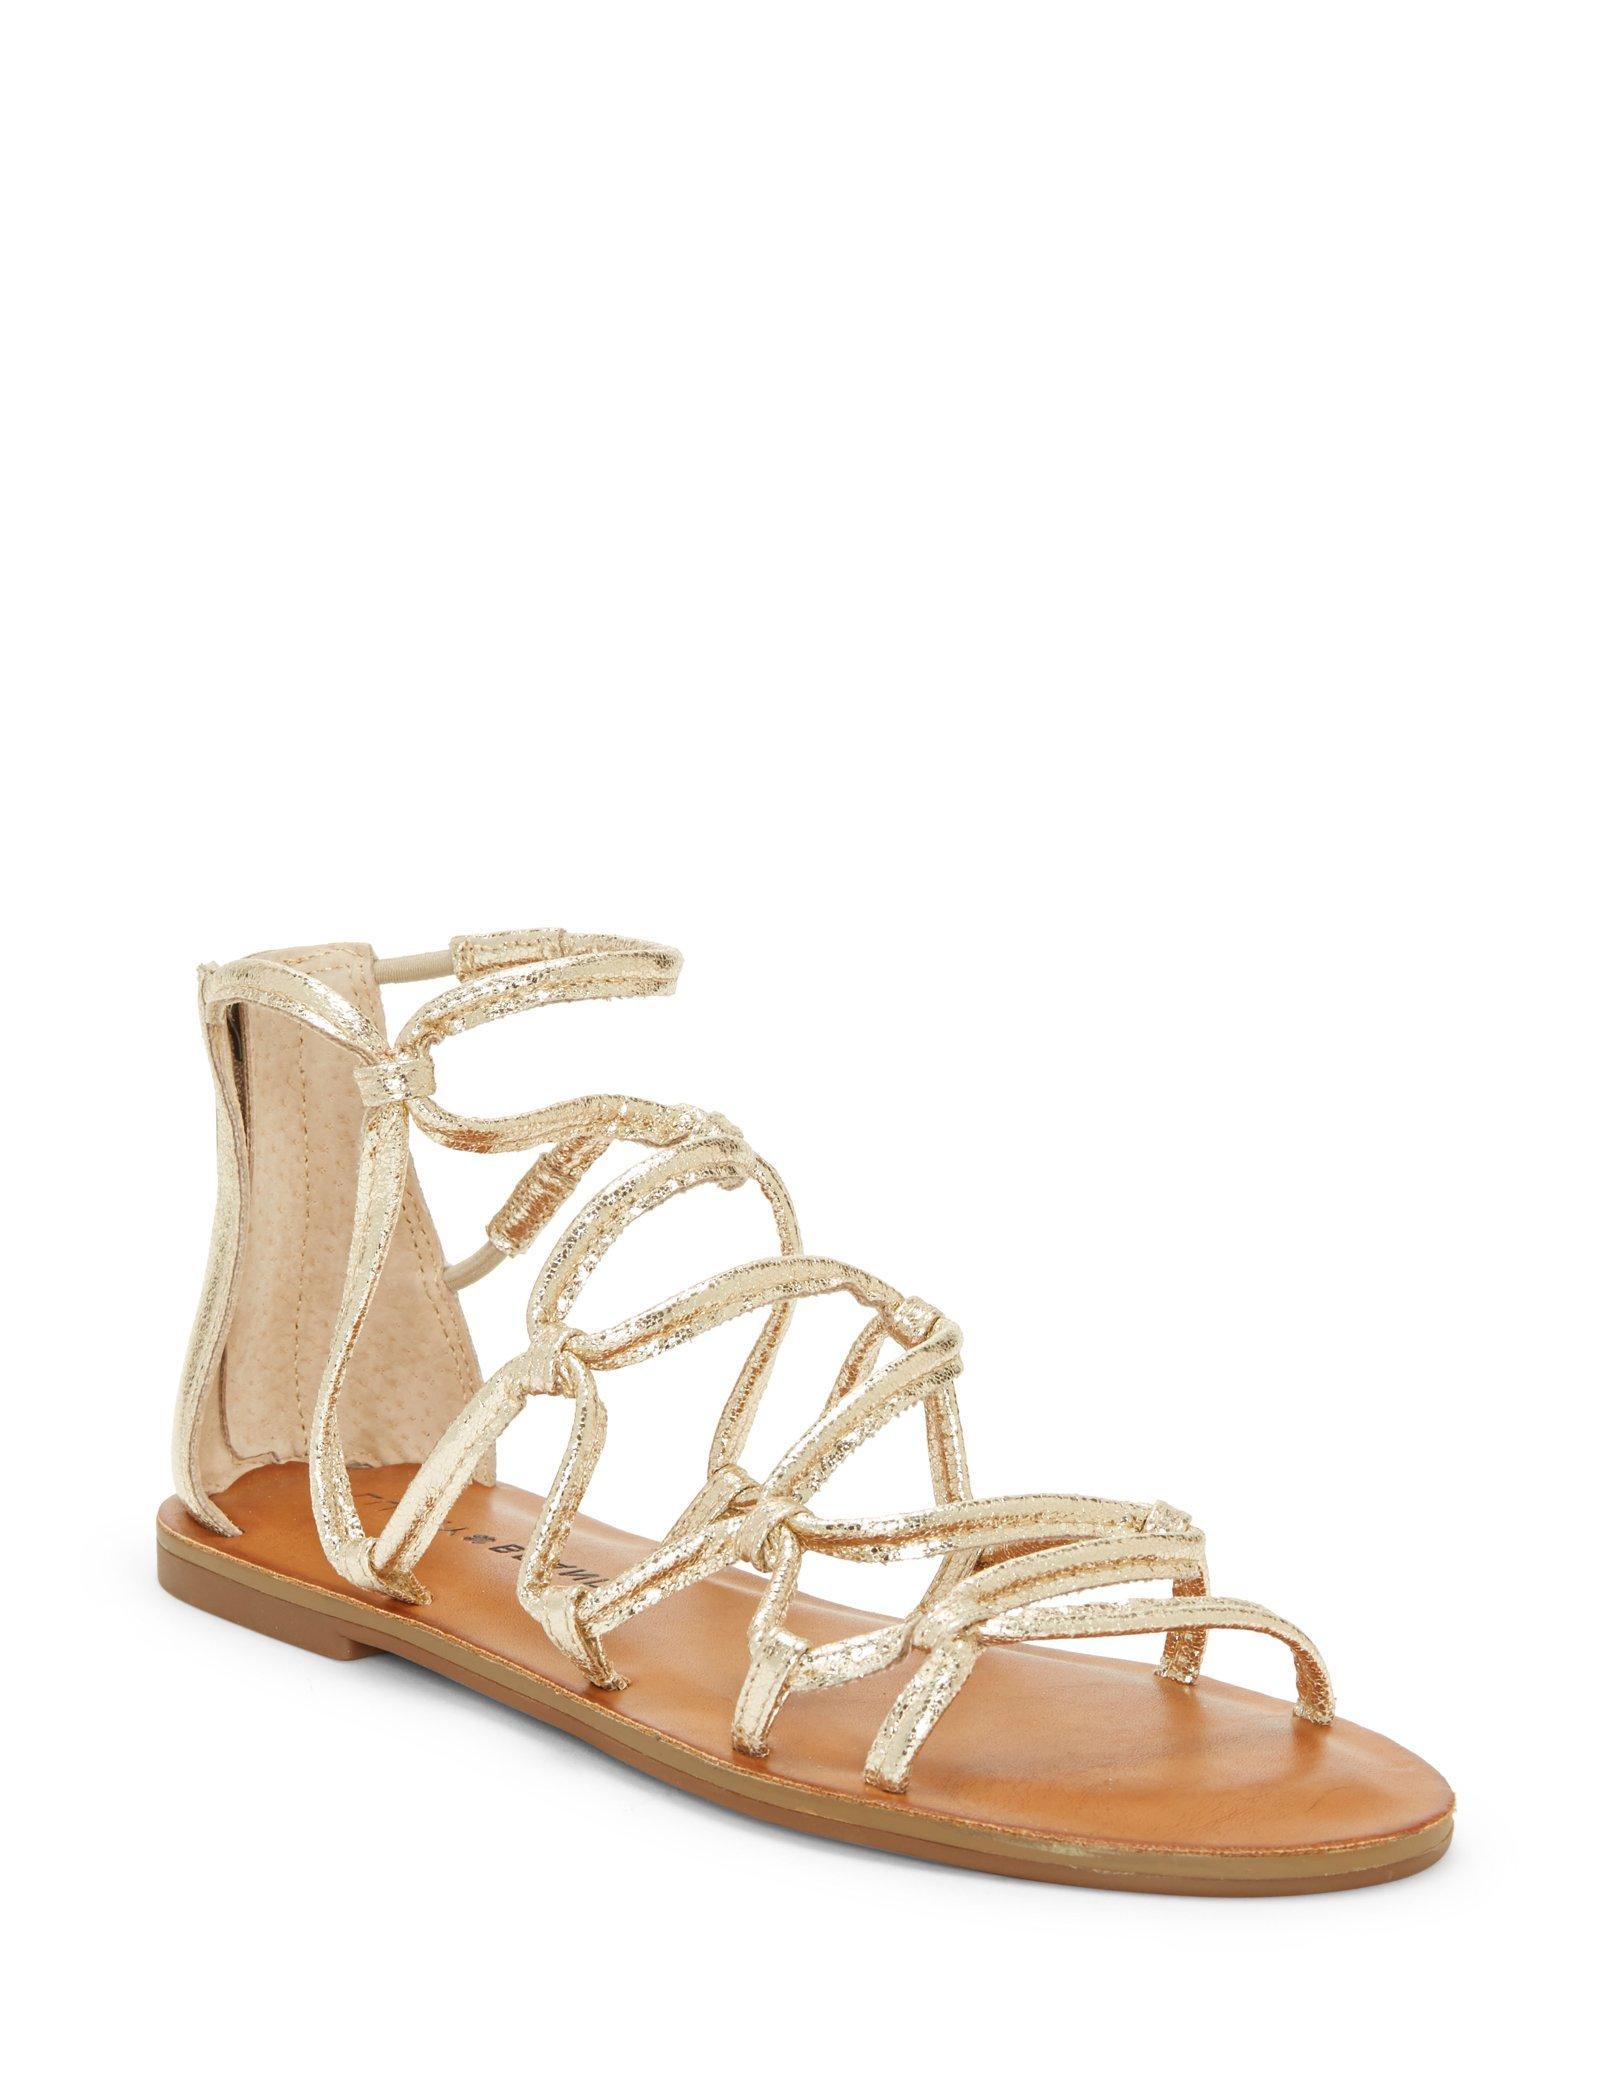 lucky brand shoes sandals